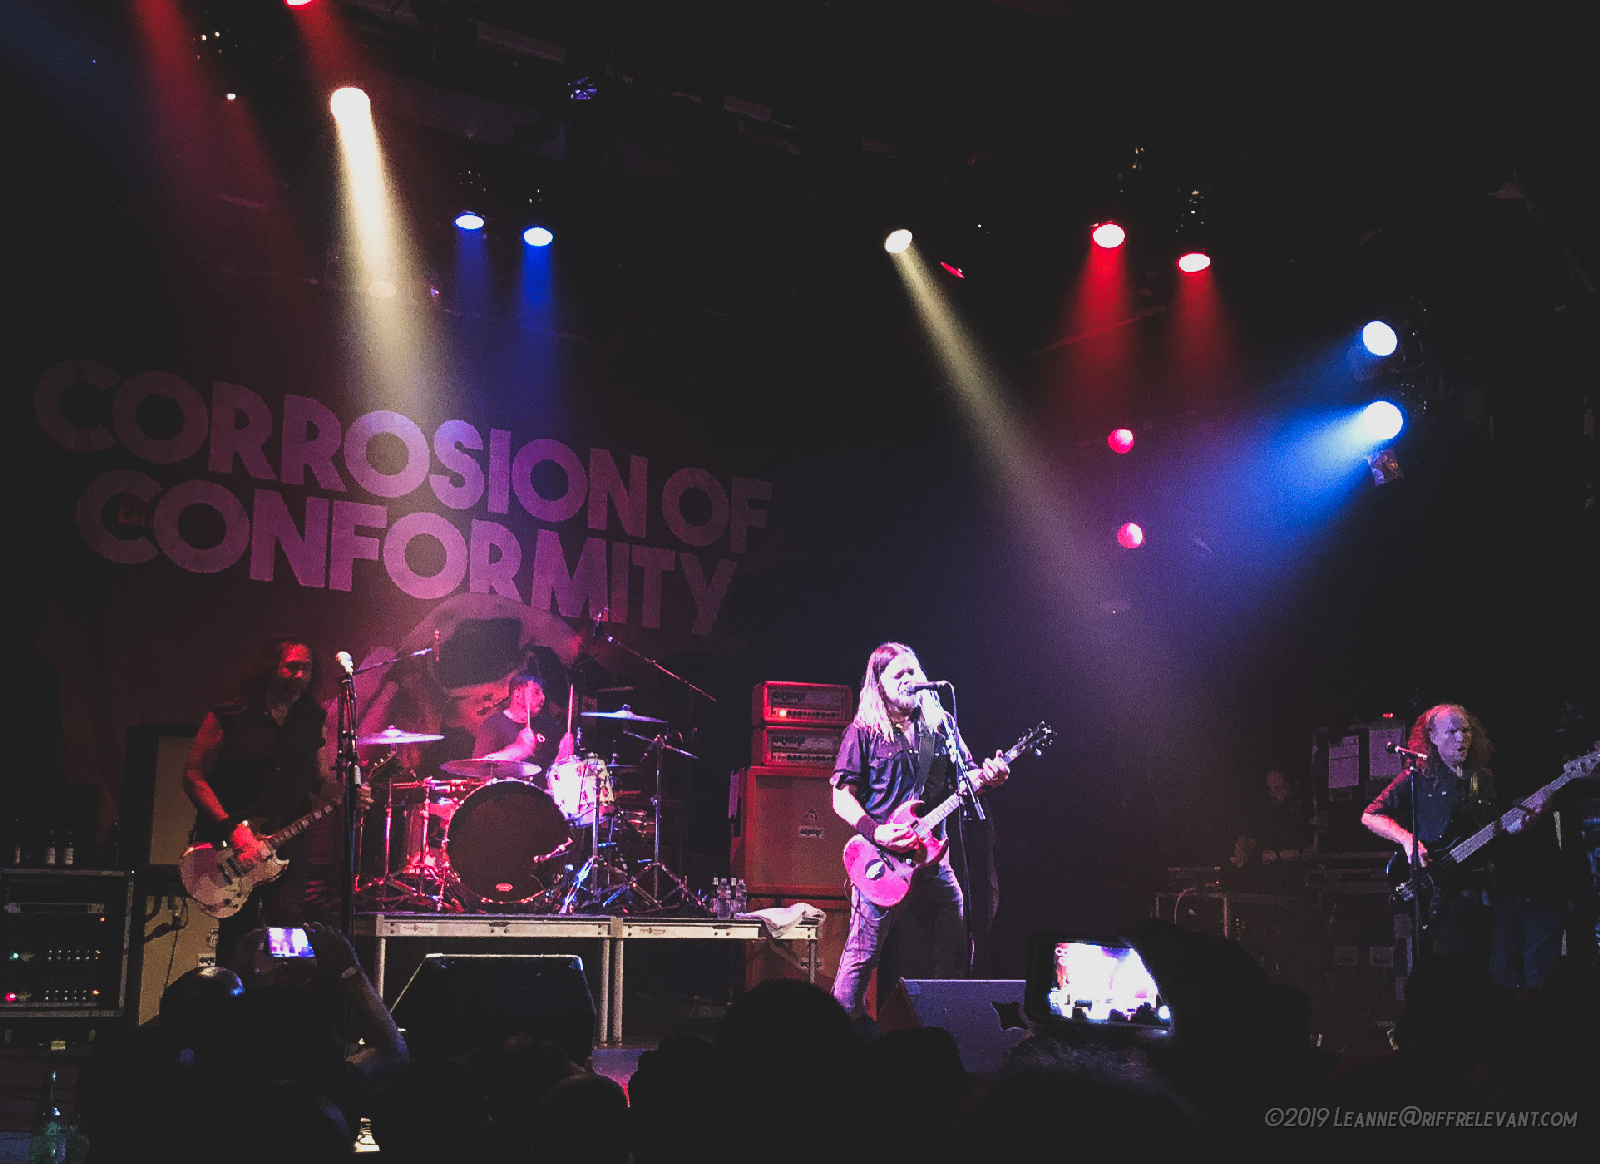 Corrosion Of Conformity - July 26, 2019, Poughkeepsie NY - Photo by Leanne Ridgeway